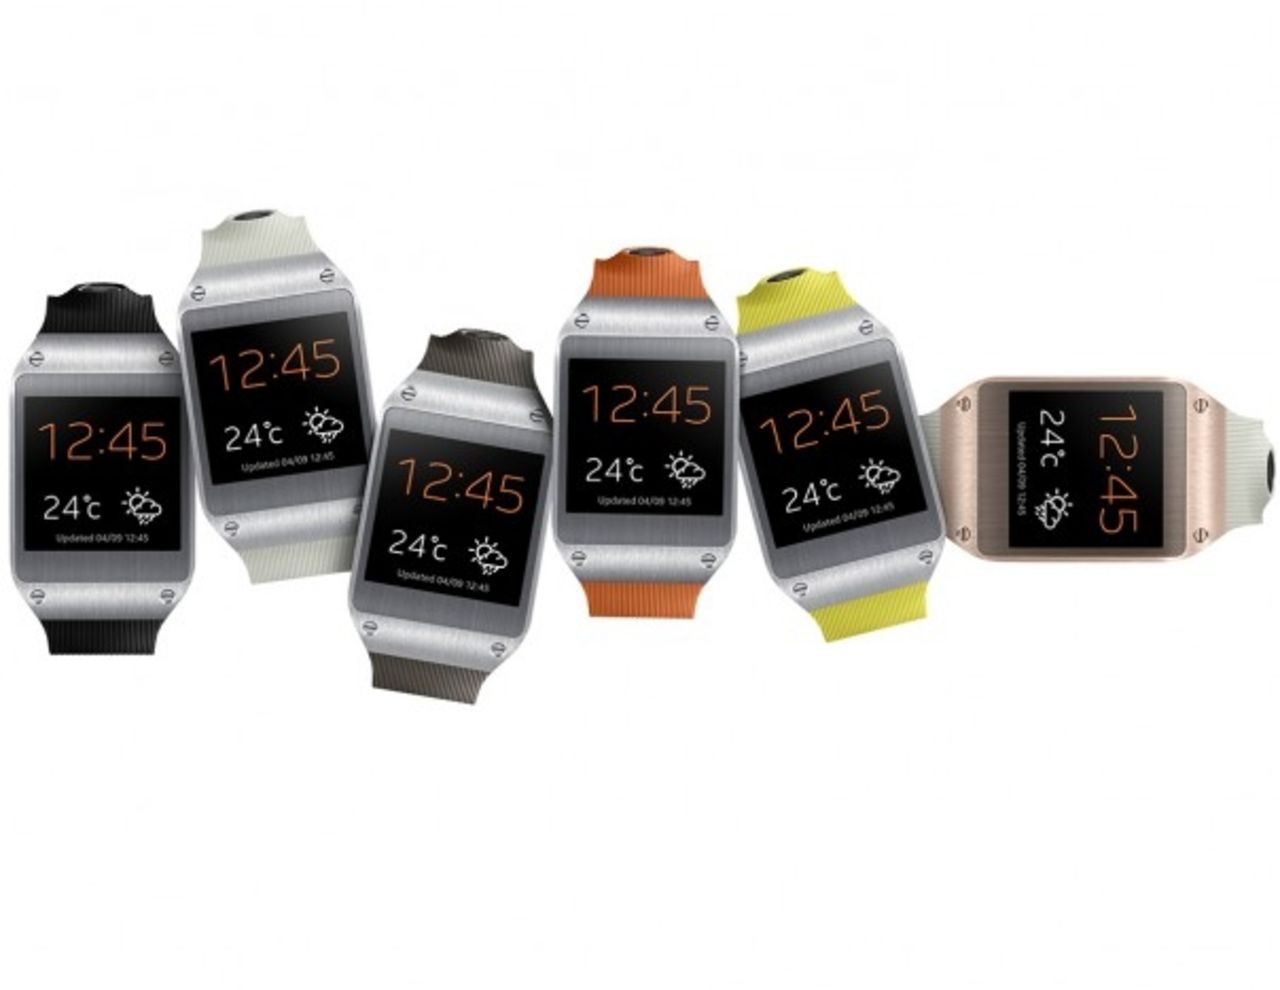 The Samsung Galaxy Gear is the first venture into smart, wearable tech. Retailing at $299, users will be able to make phone calls and take pictures with the smartwatch.